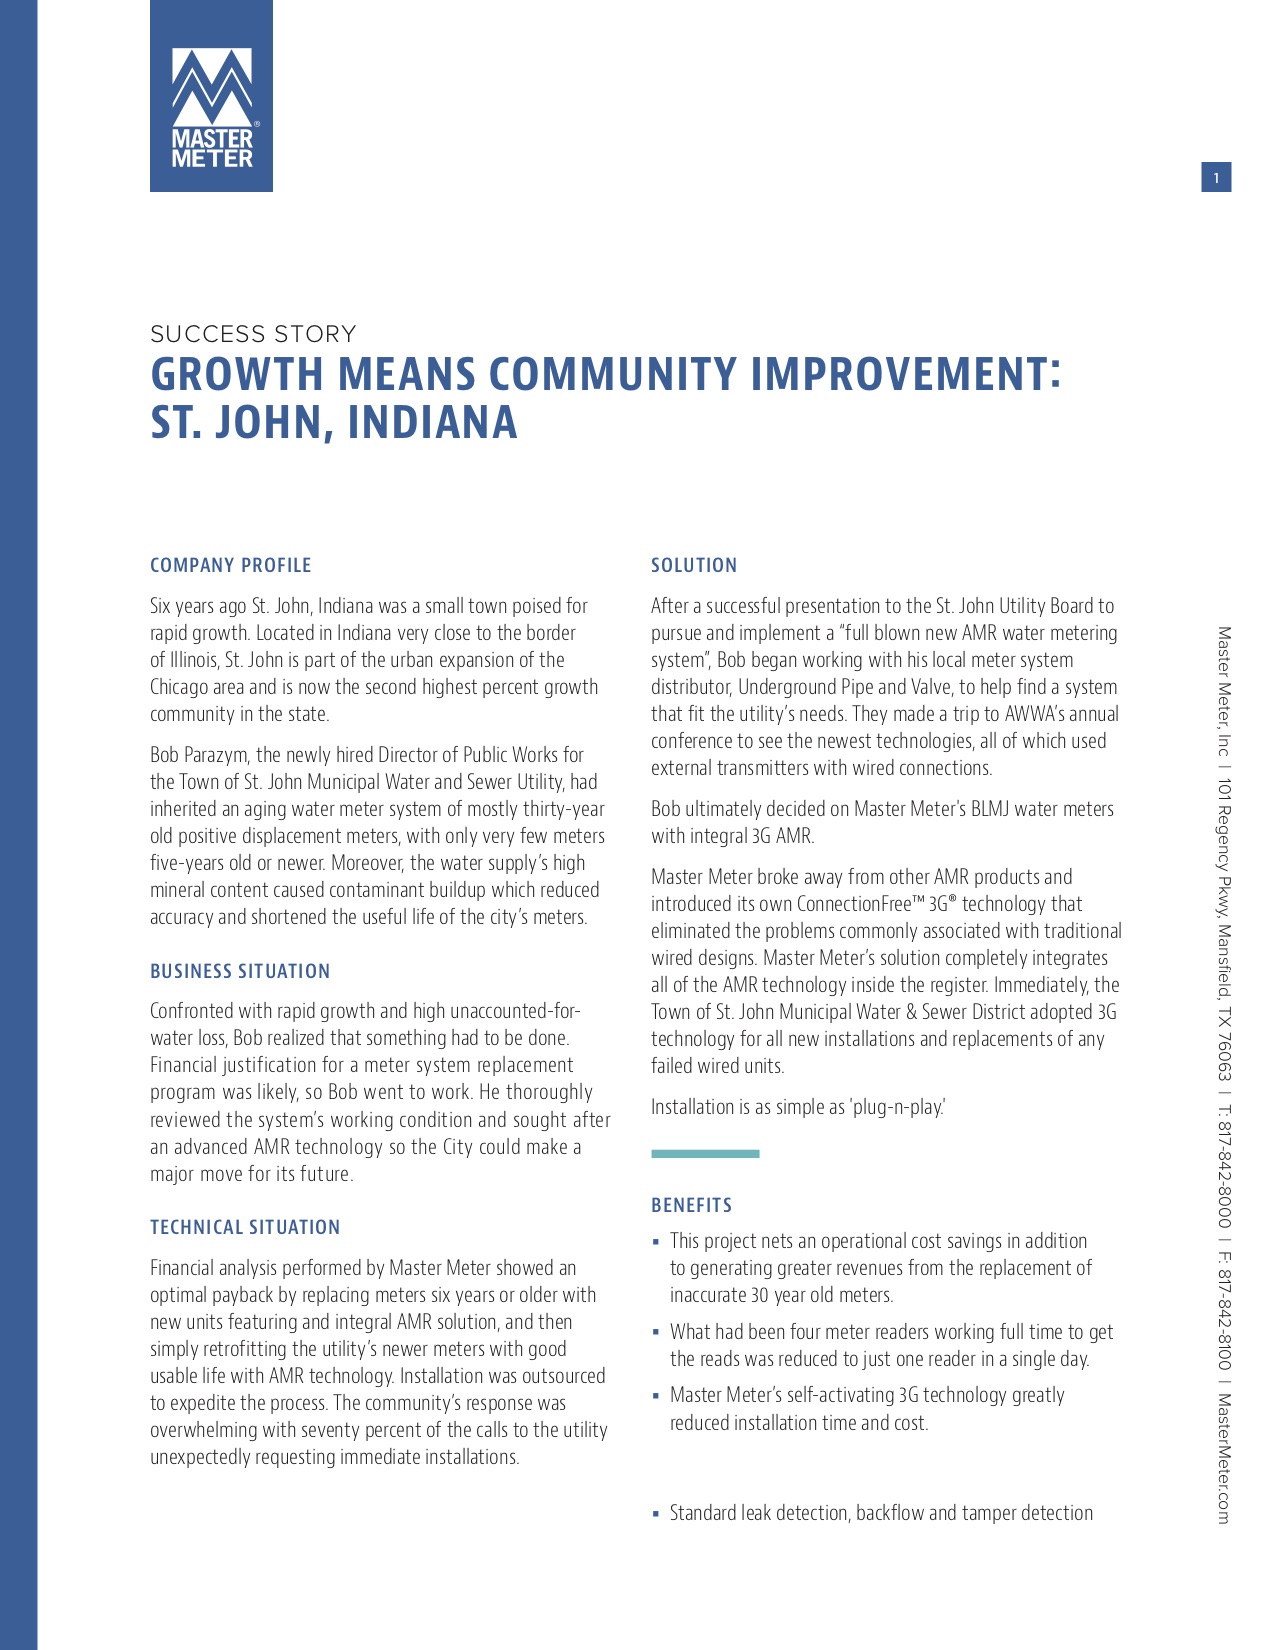 Growth Means Community Improvement: St. John, Indiana